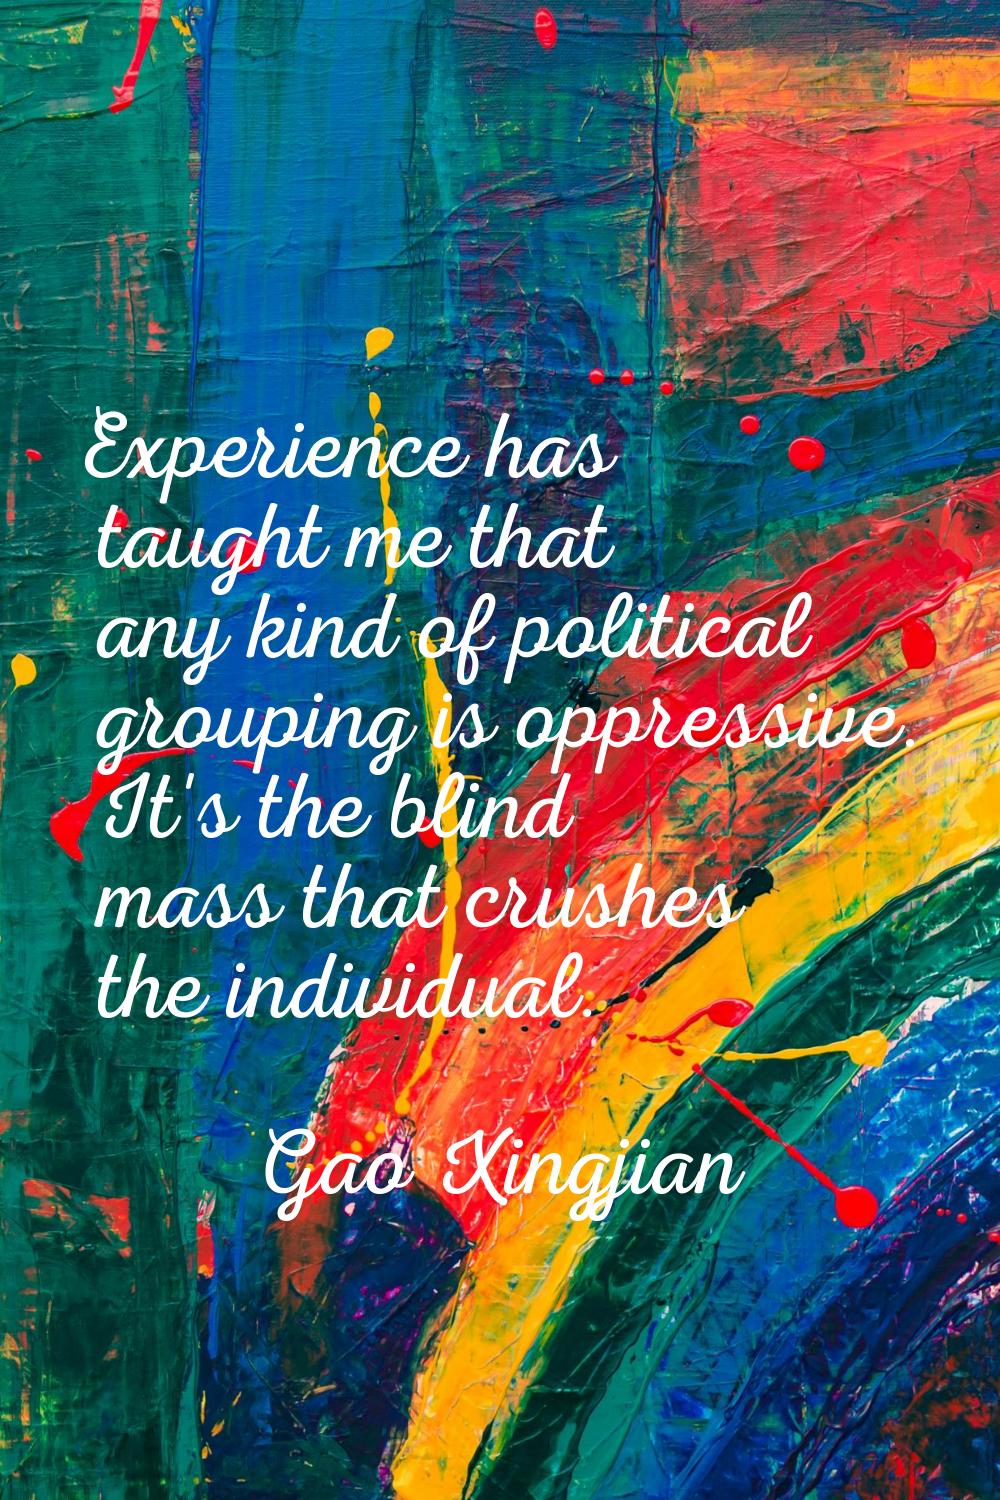 Experience has taught me that any kind of political grouping is oppressive. It's the blind mass tha